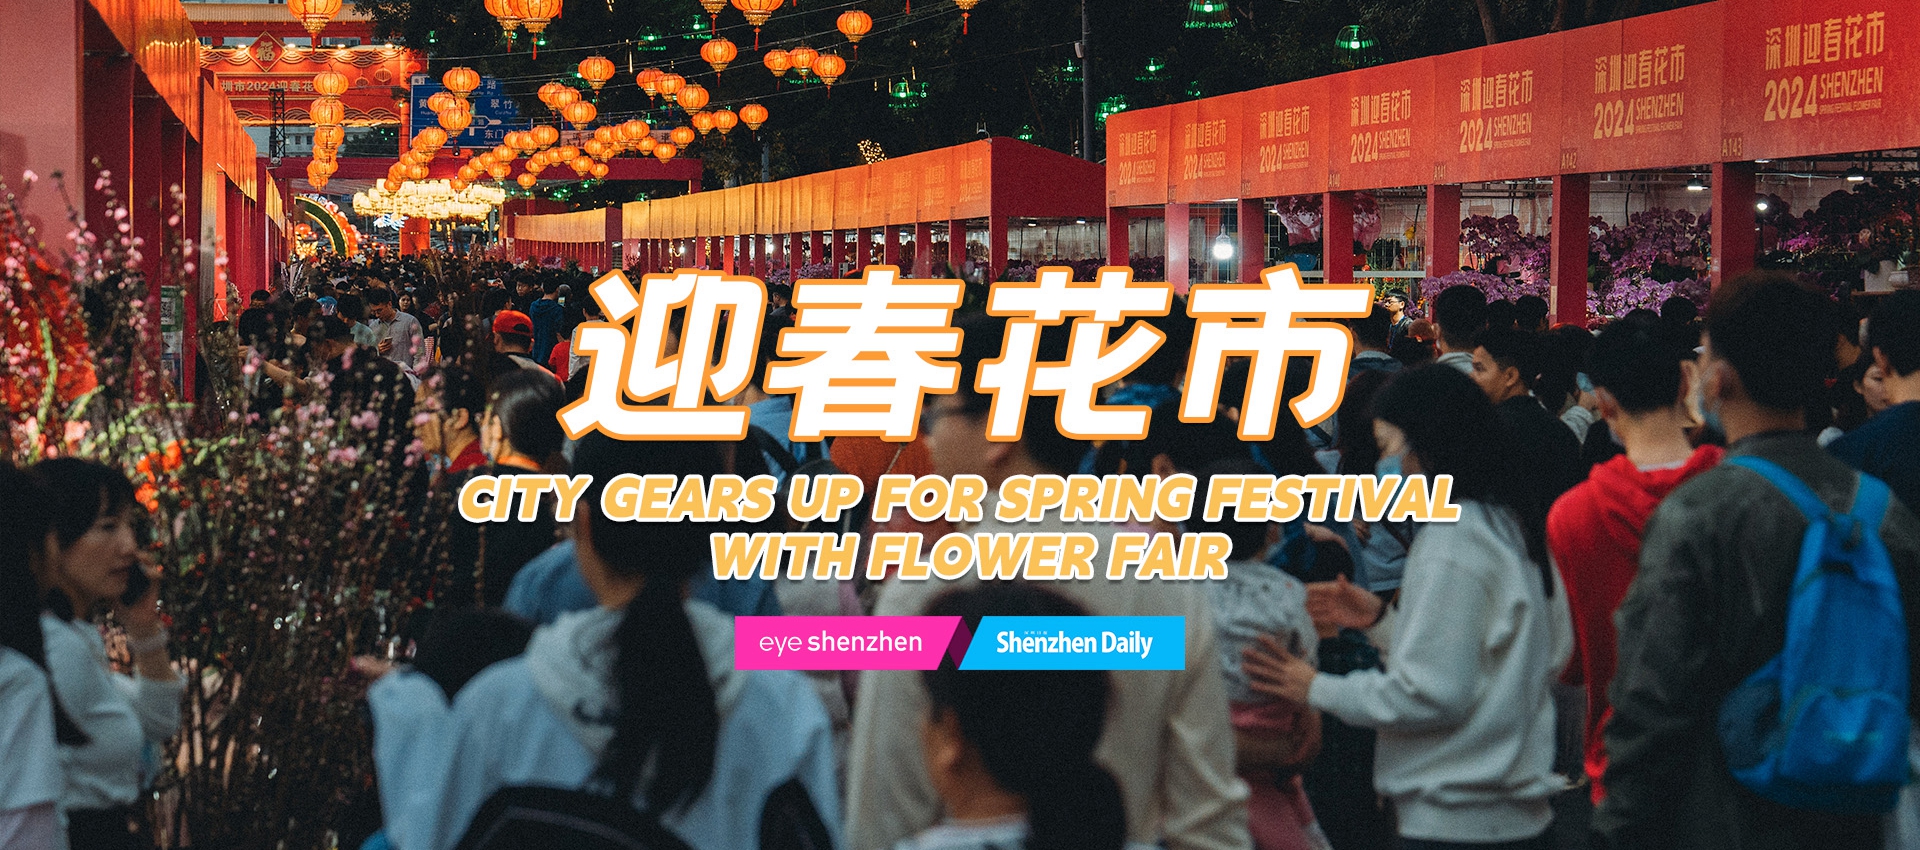 City gears up for Spring Festival with flower fairs